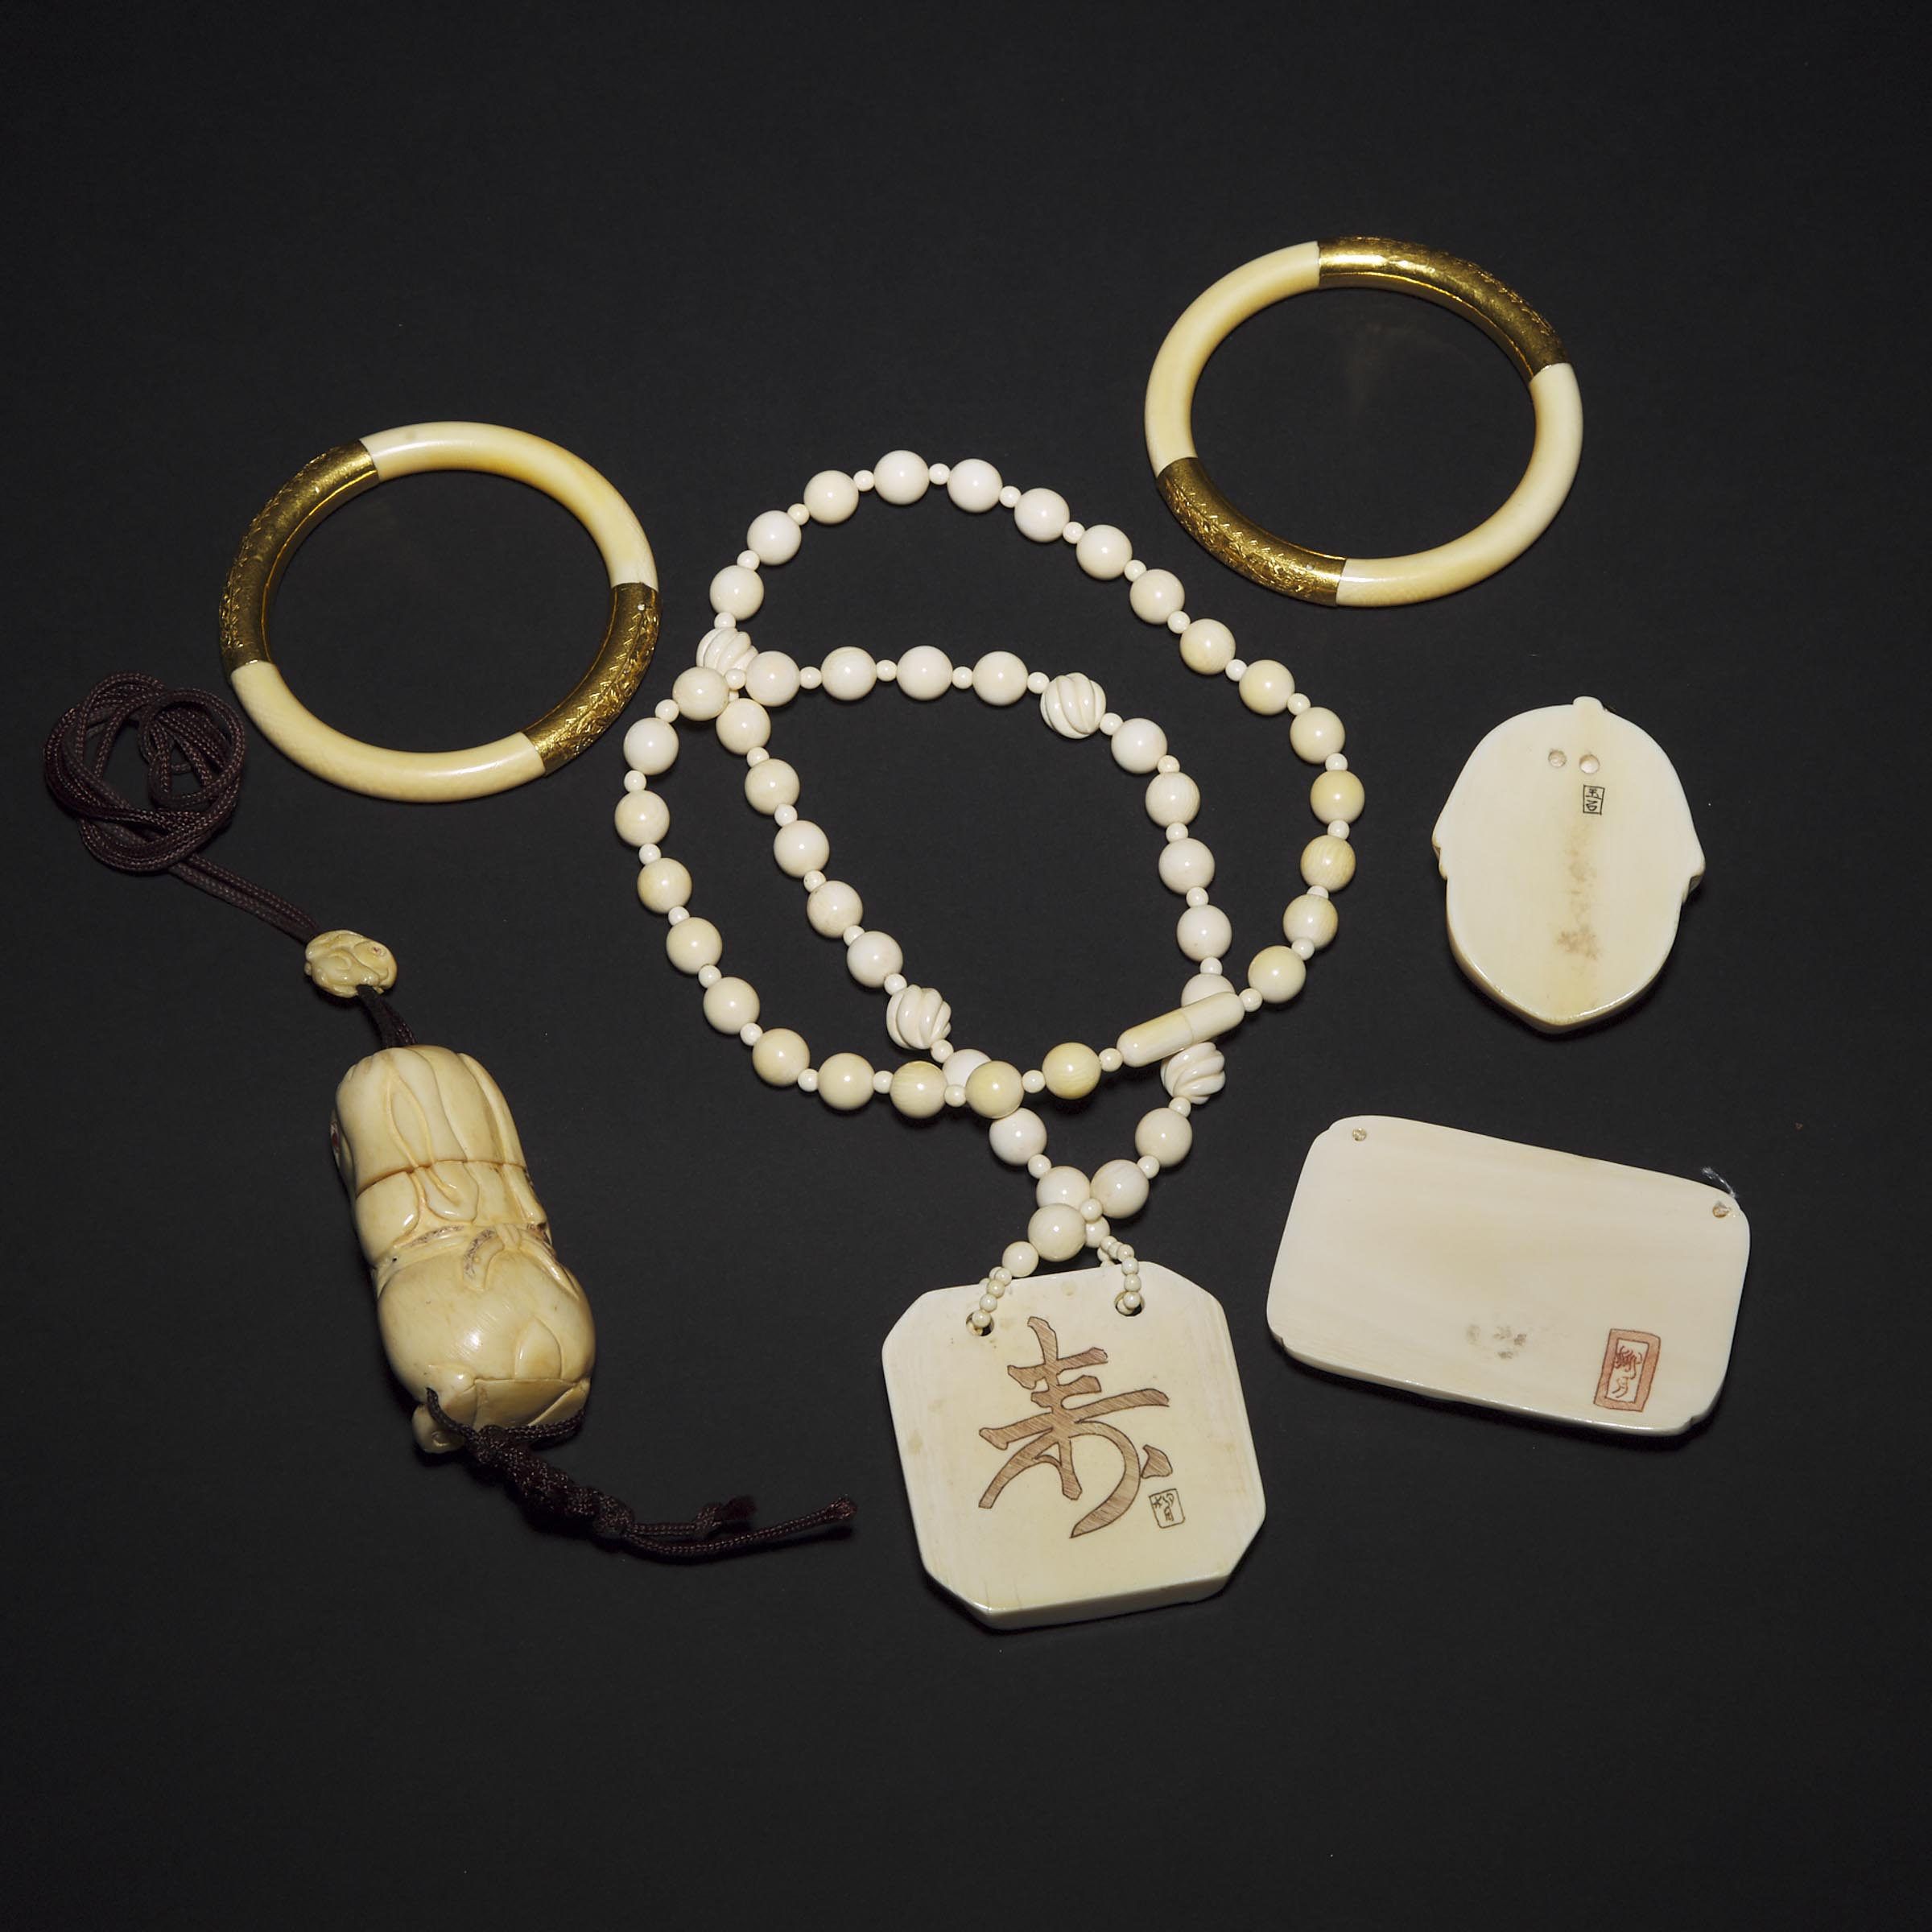 A Group of Four Ivory and Bone Carvings, Together With Two Gold Mounted Bangles, 19th/20th Century